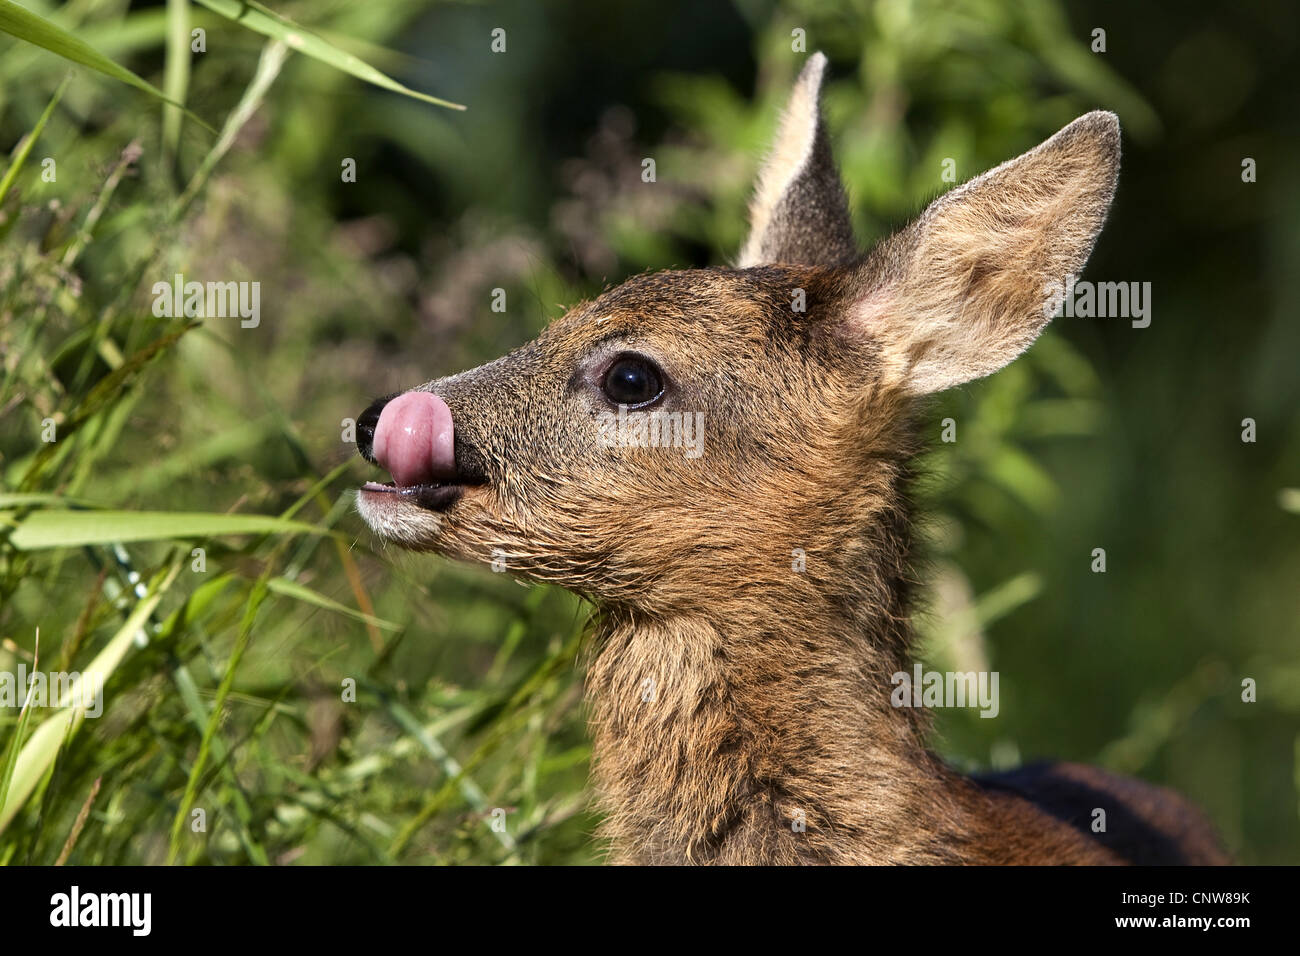 roe deer (Capreolus capreolus), fwan licking its mouth, Germany Stock Photo